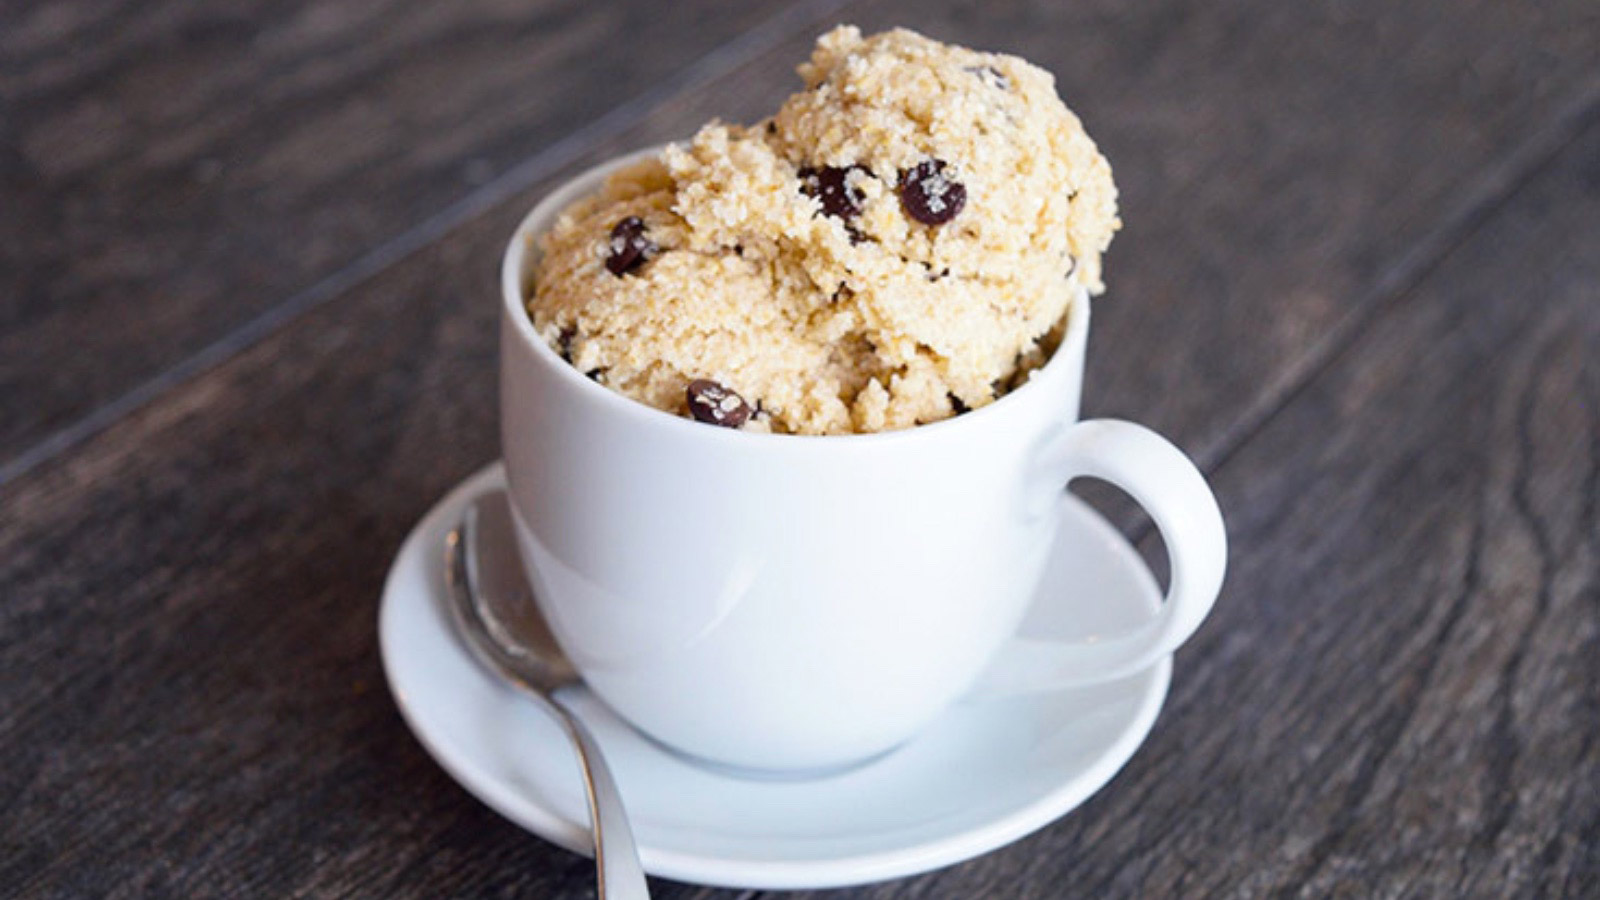 Edible cookie dough served in a white cappuccino mug on a white plate with a spoon.